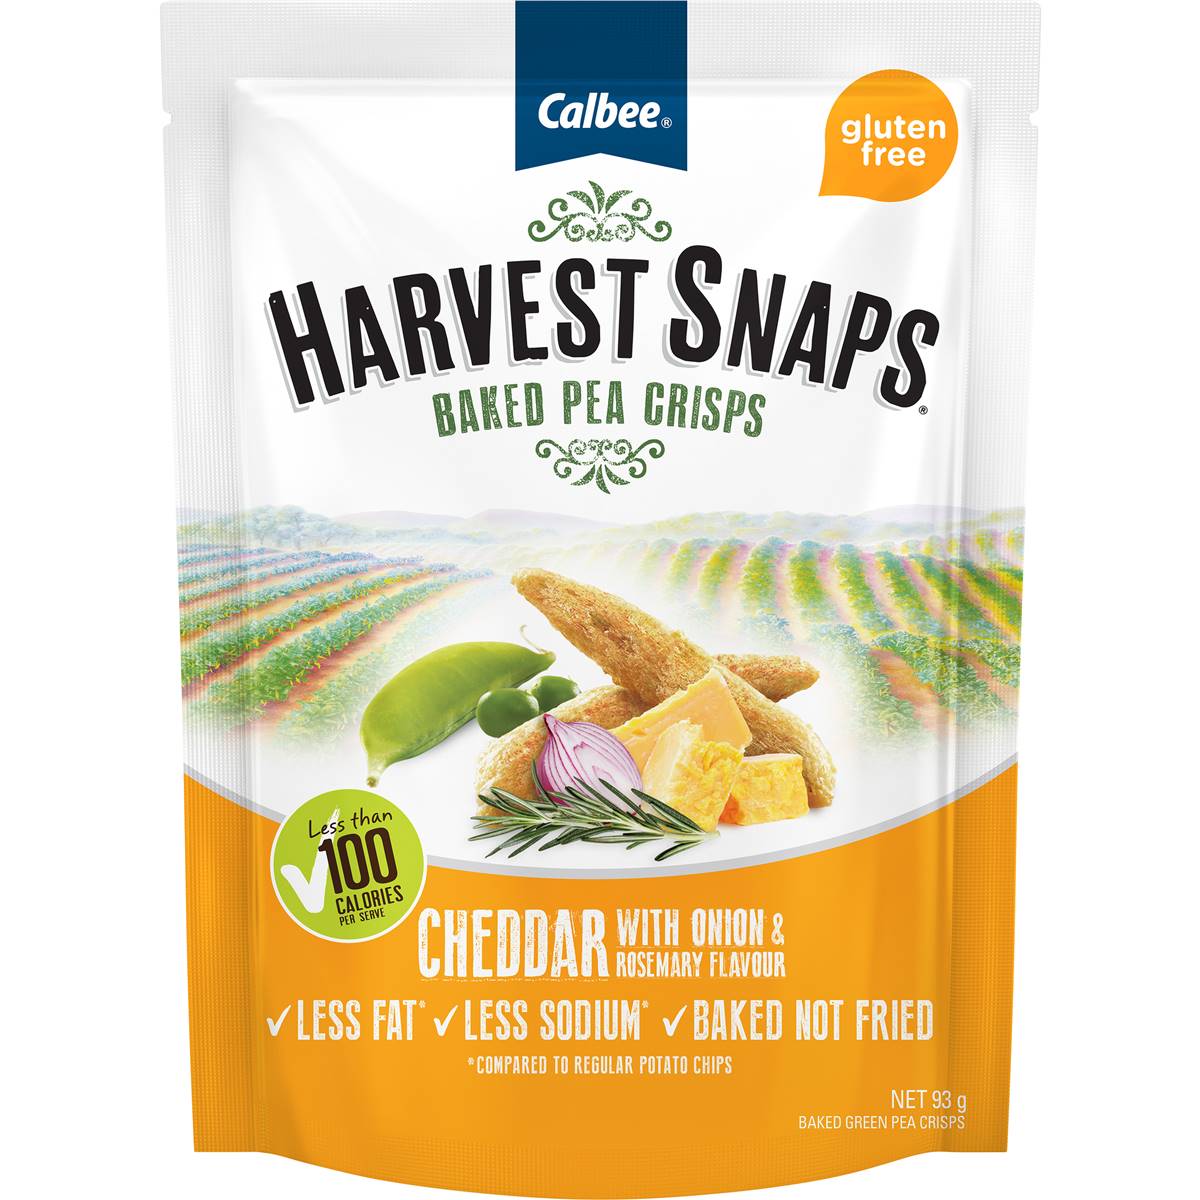 Calories in Calbee Harvest Snaps Baked Pea Crisps Cheddar With Onion & Rosemary